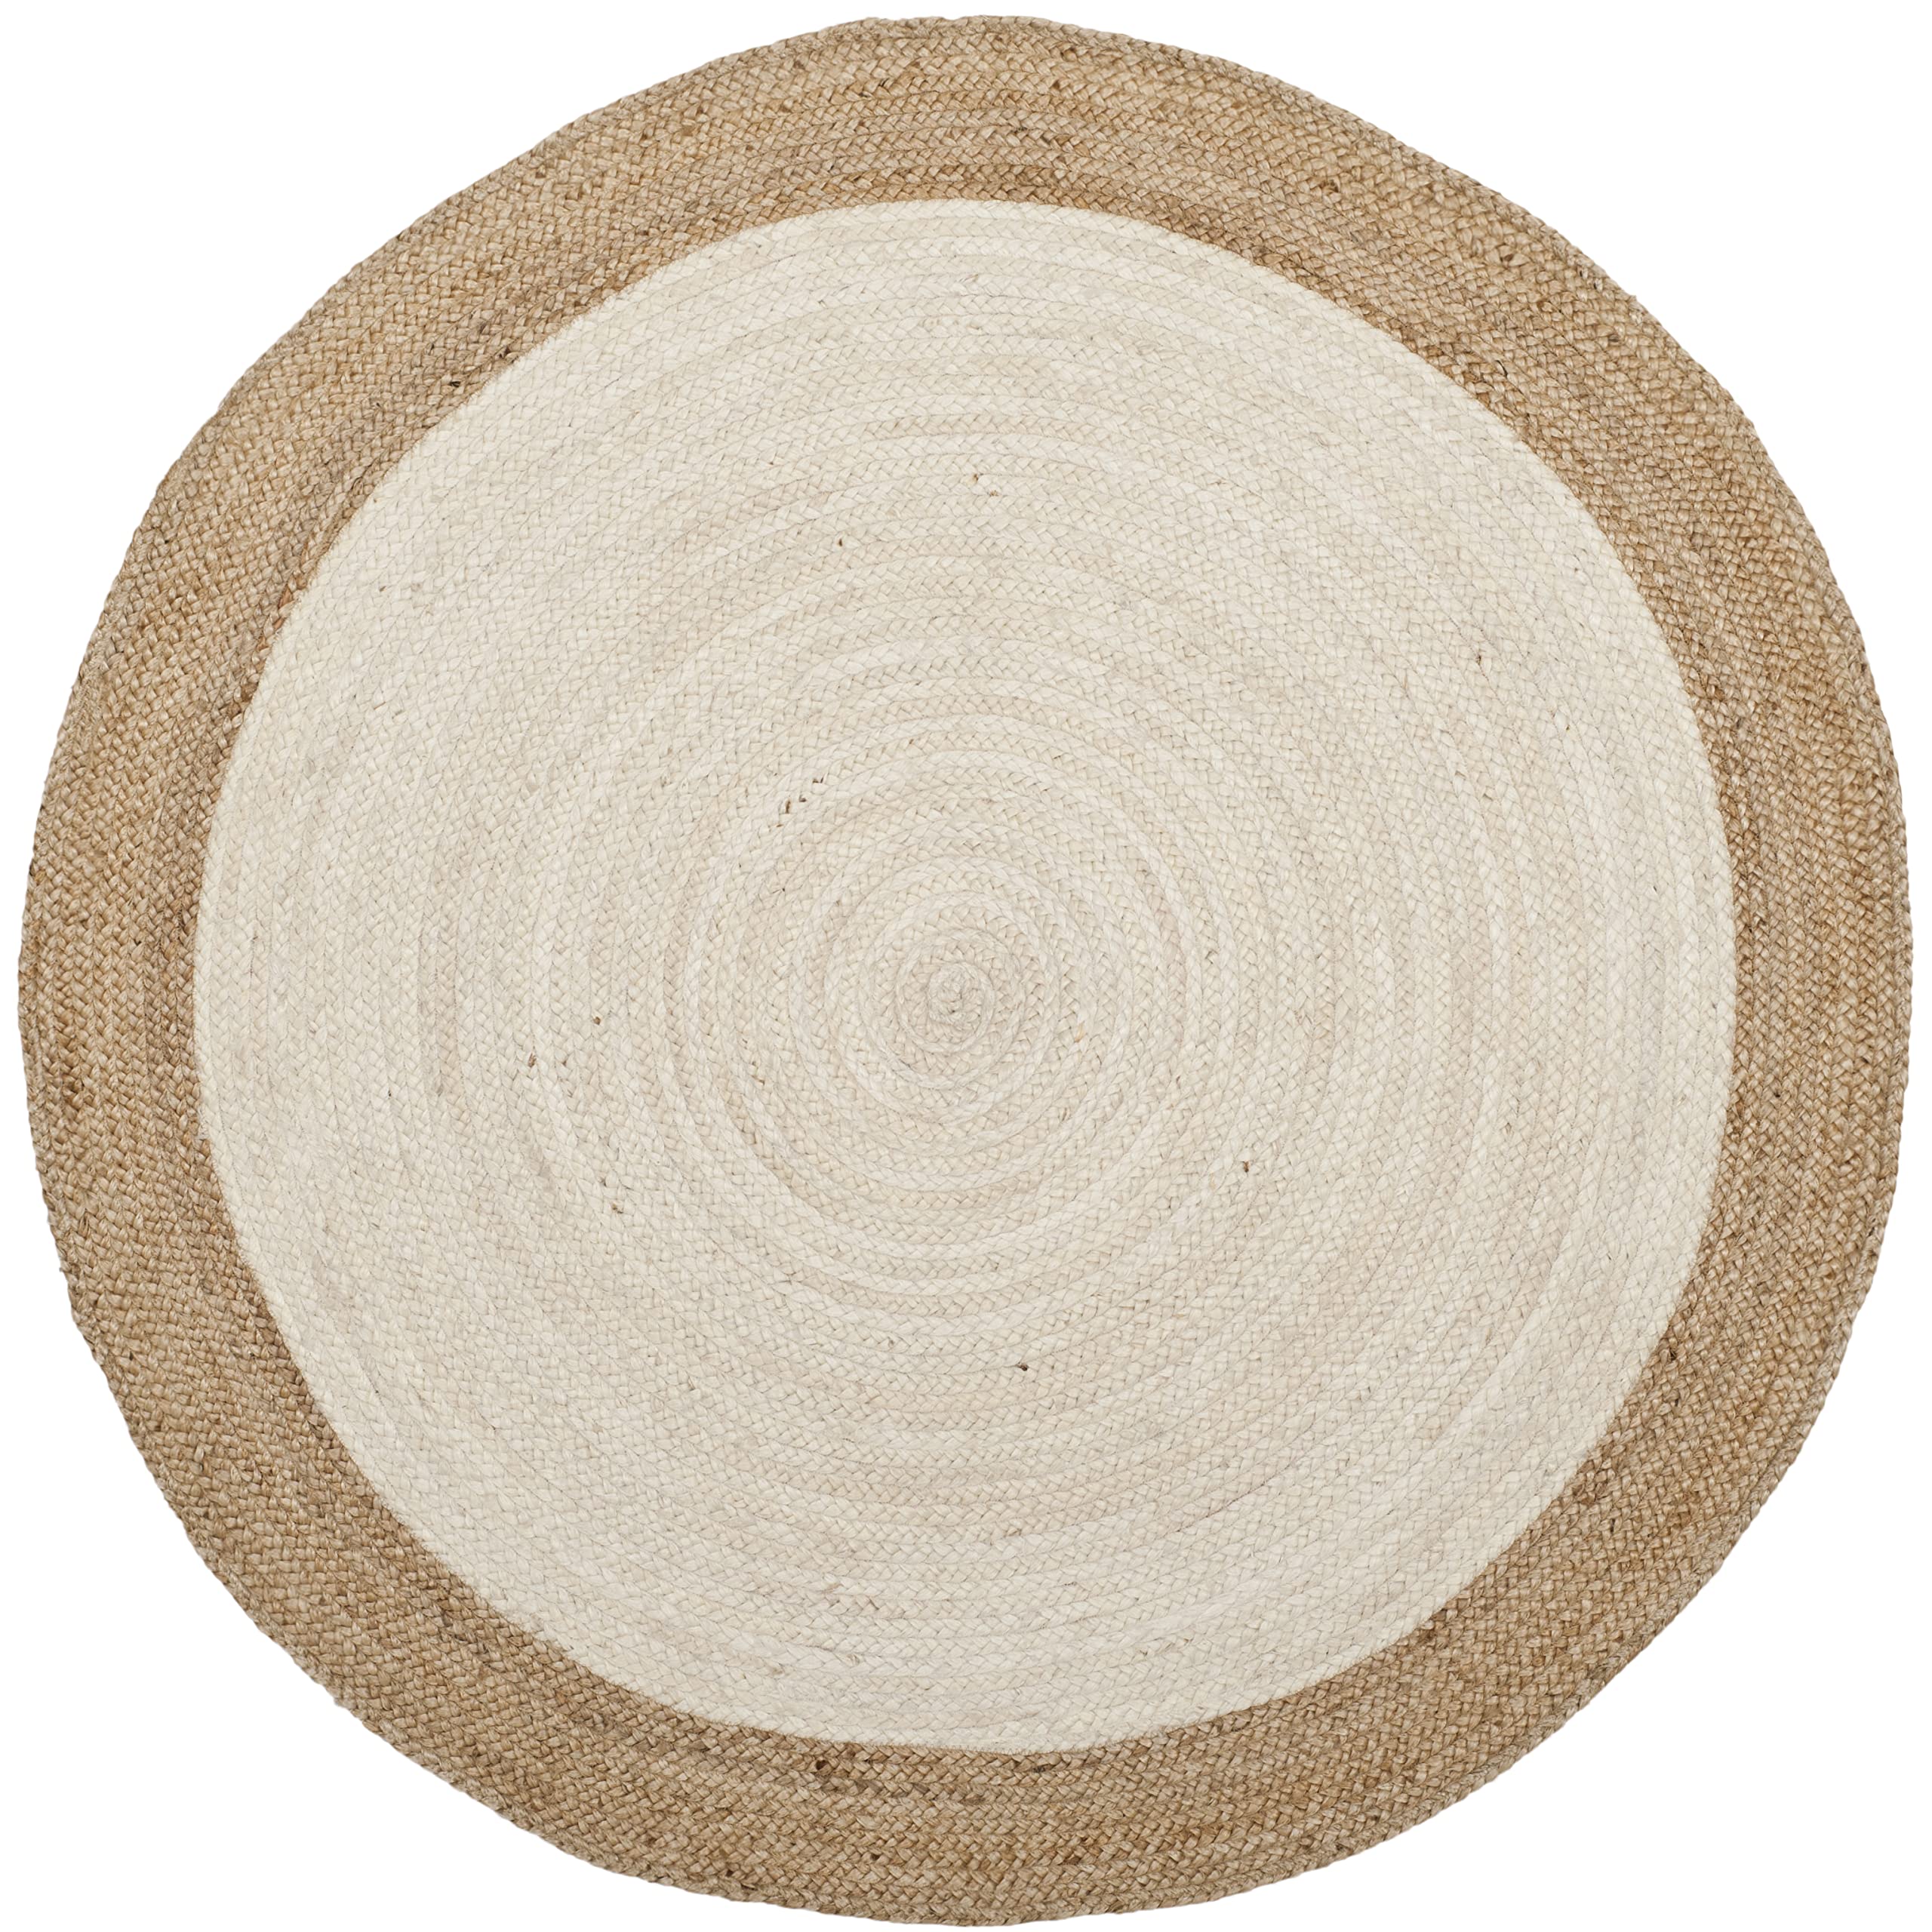 SAFAVIEH Natural Fiber Collection Area Rug - 4' Round, Ivory & Natural, Handmade Boho Braided Jute, Ideal for High Traffic Areas in Living Room, Bedroom (NF801M)